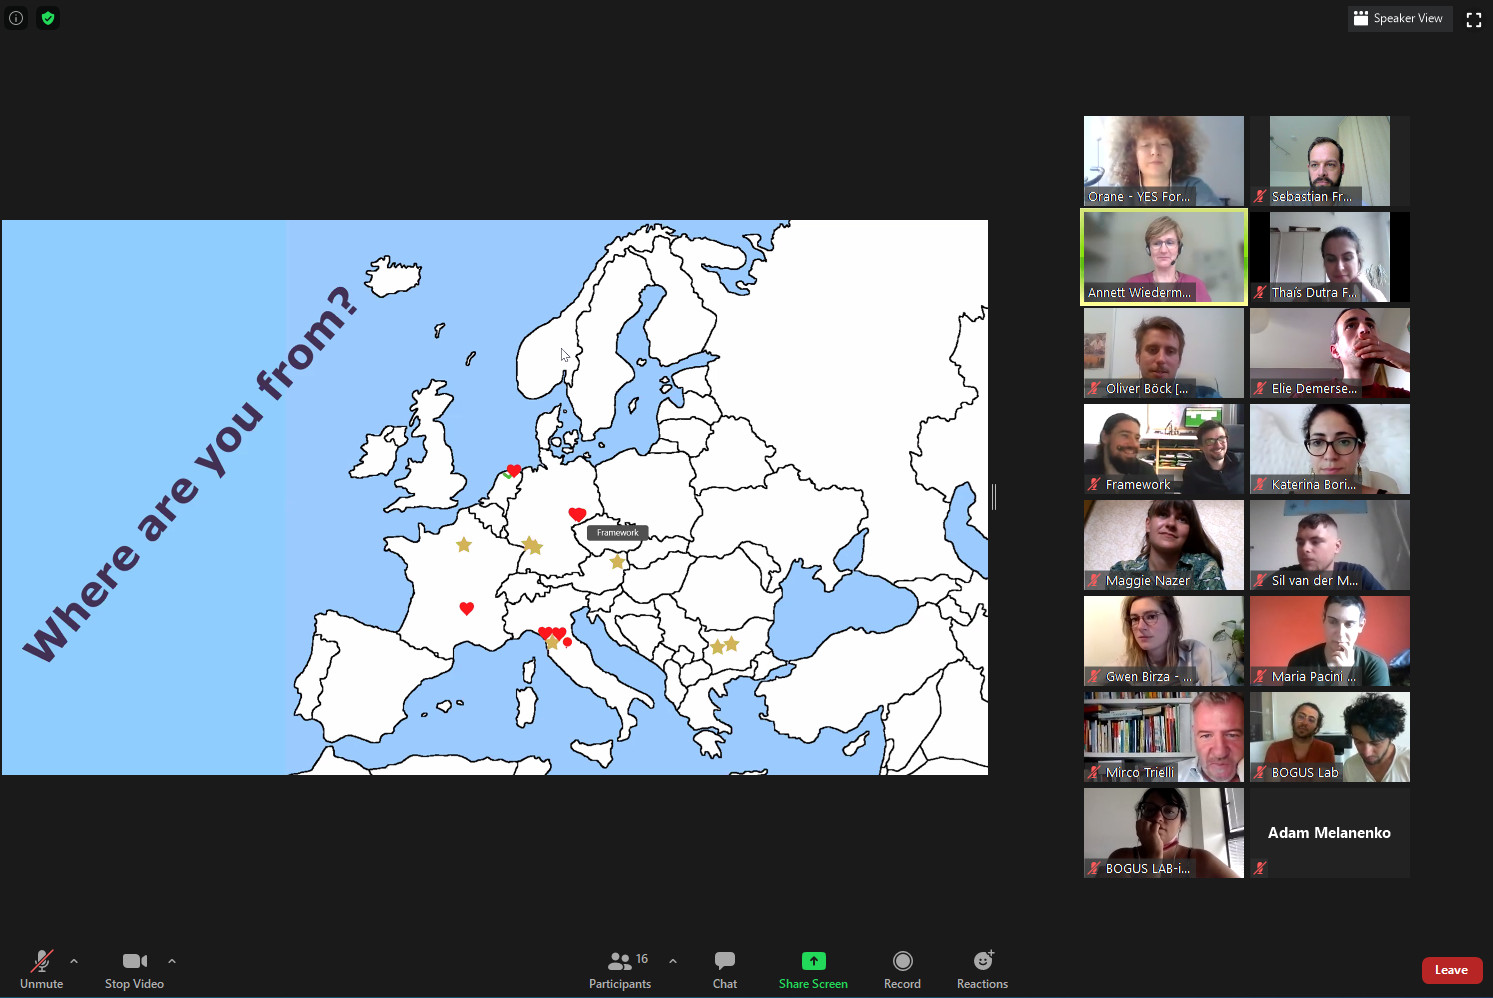 Online meeting of the VOICE project group.